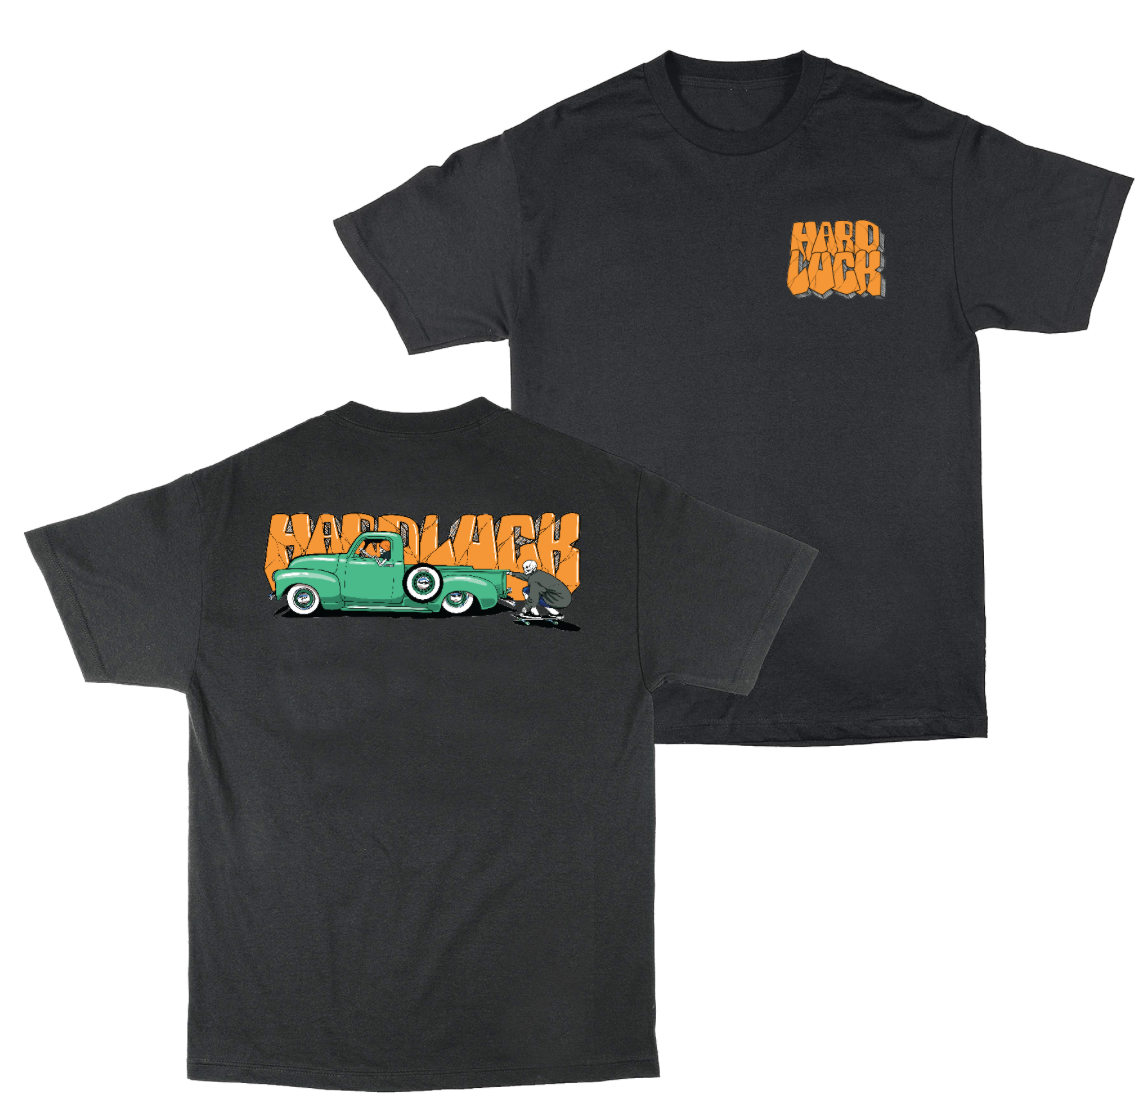 Molinar S/S Tee Shirt Blk (size options listed)